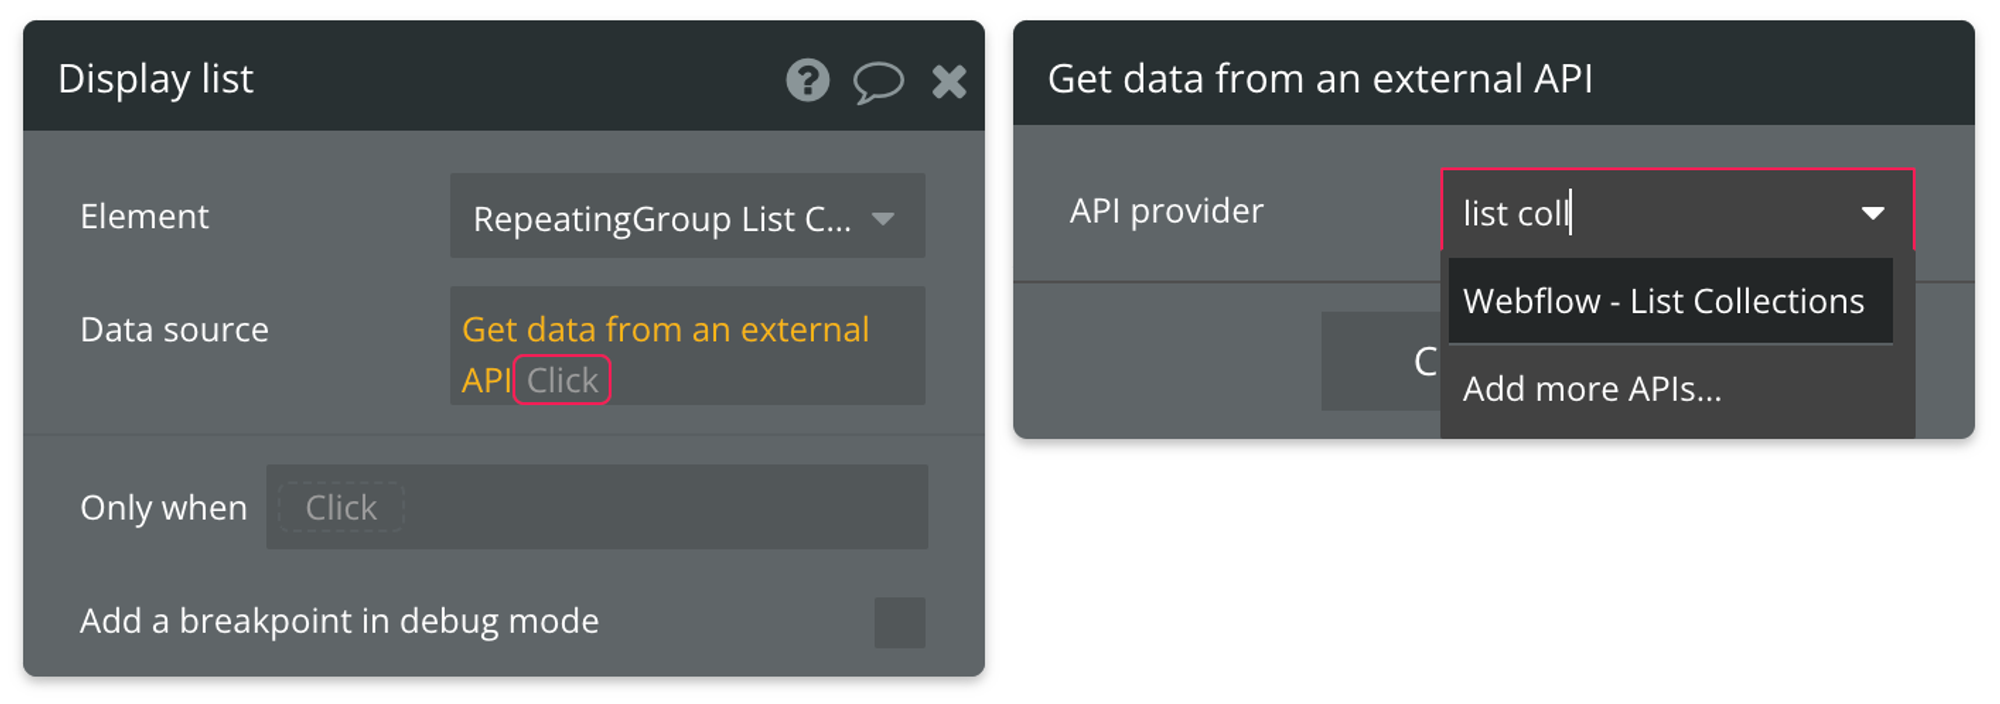 Select "Get data from external API" from the list of data sources, then find Webflow - List Collections from the list of API providers